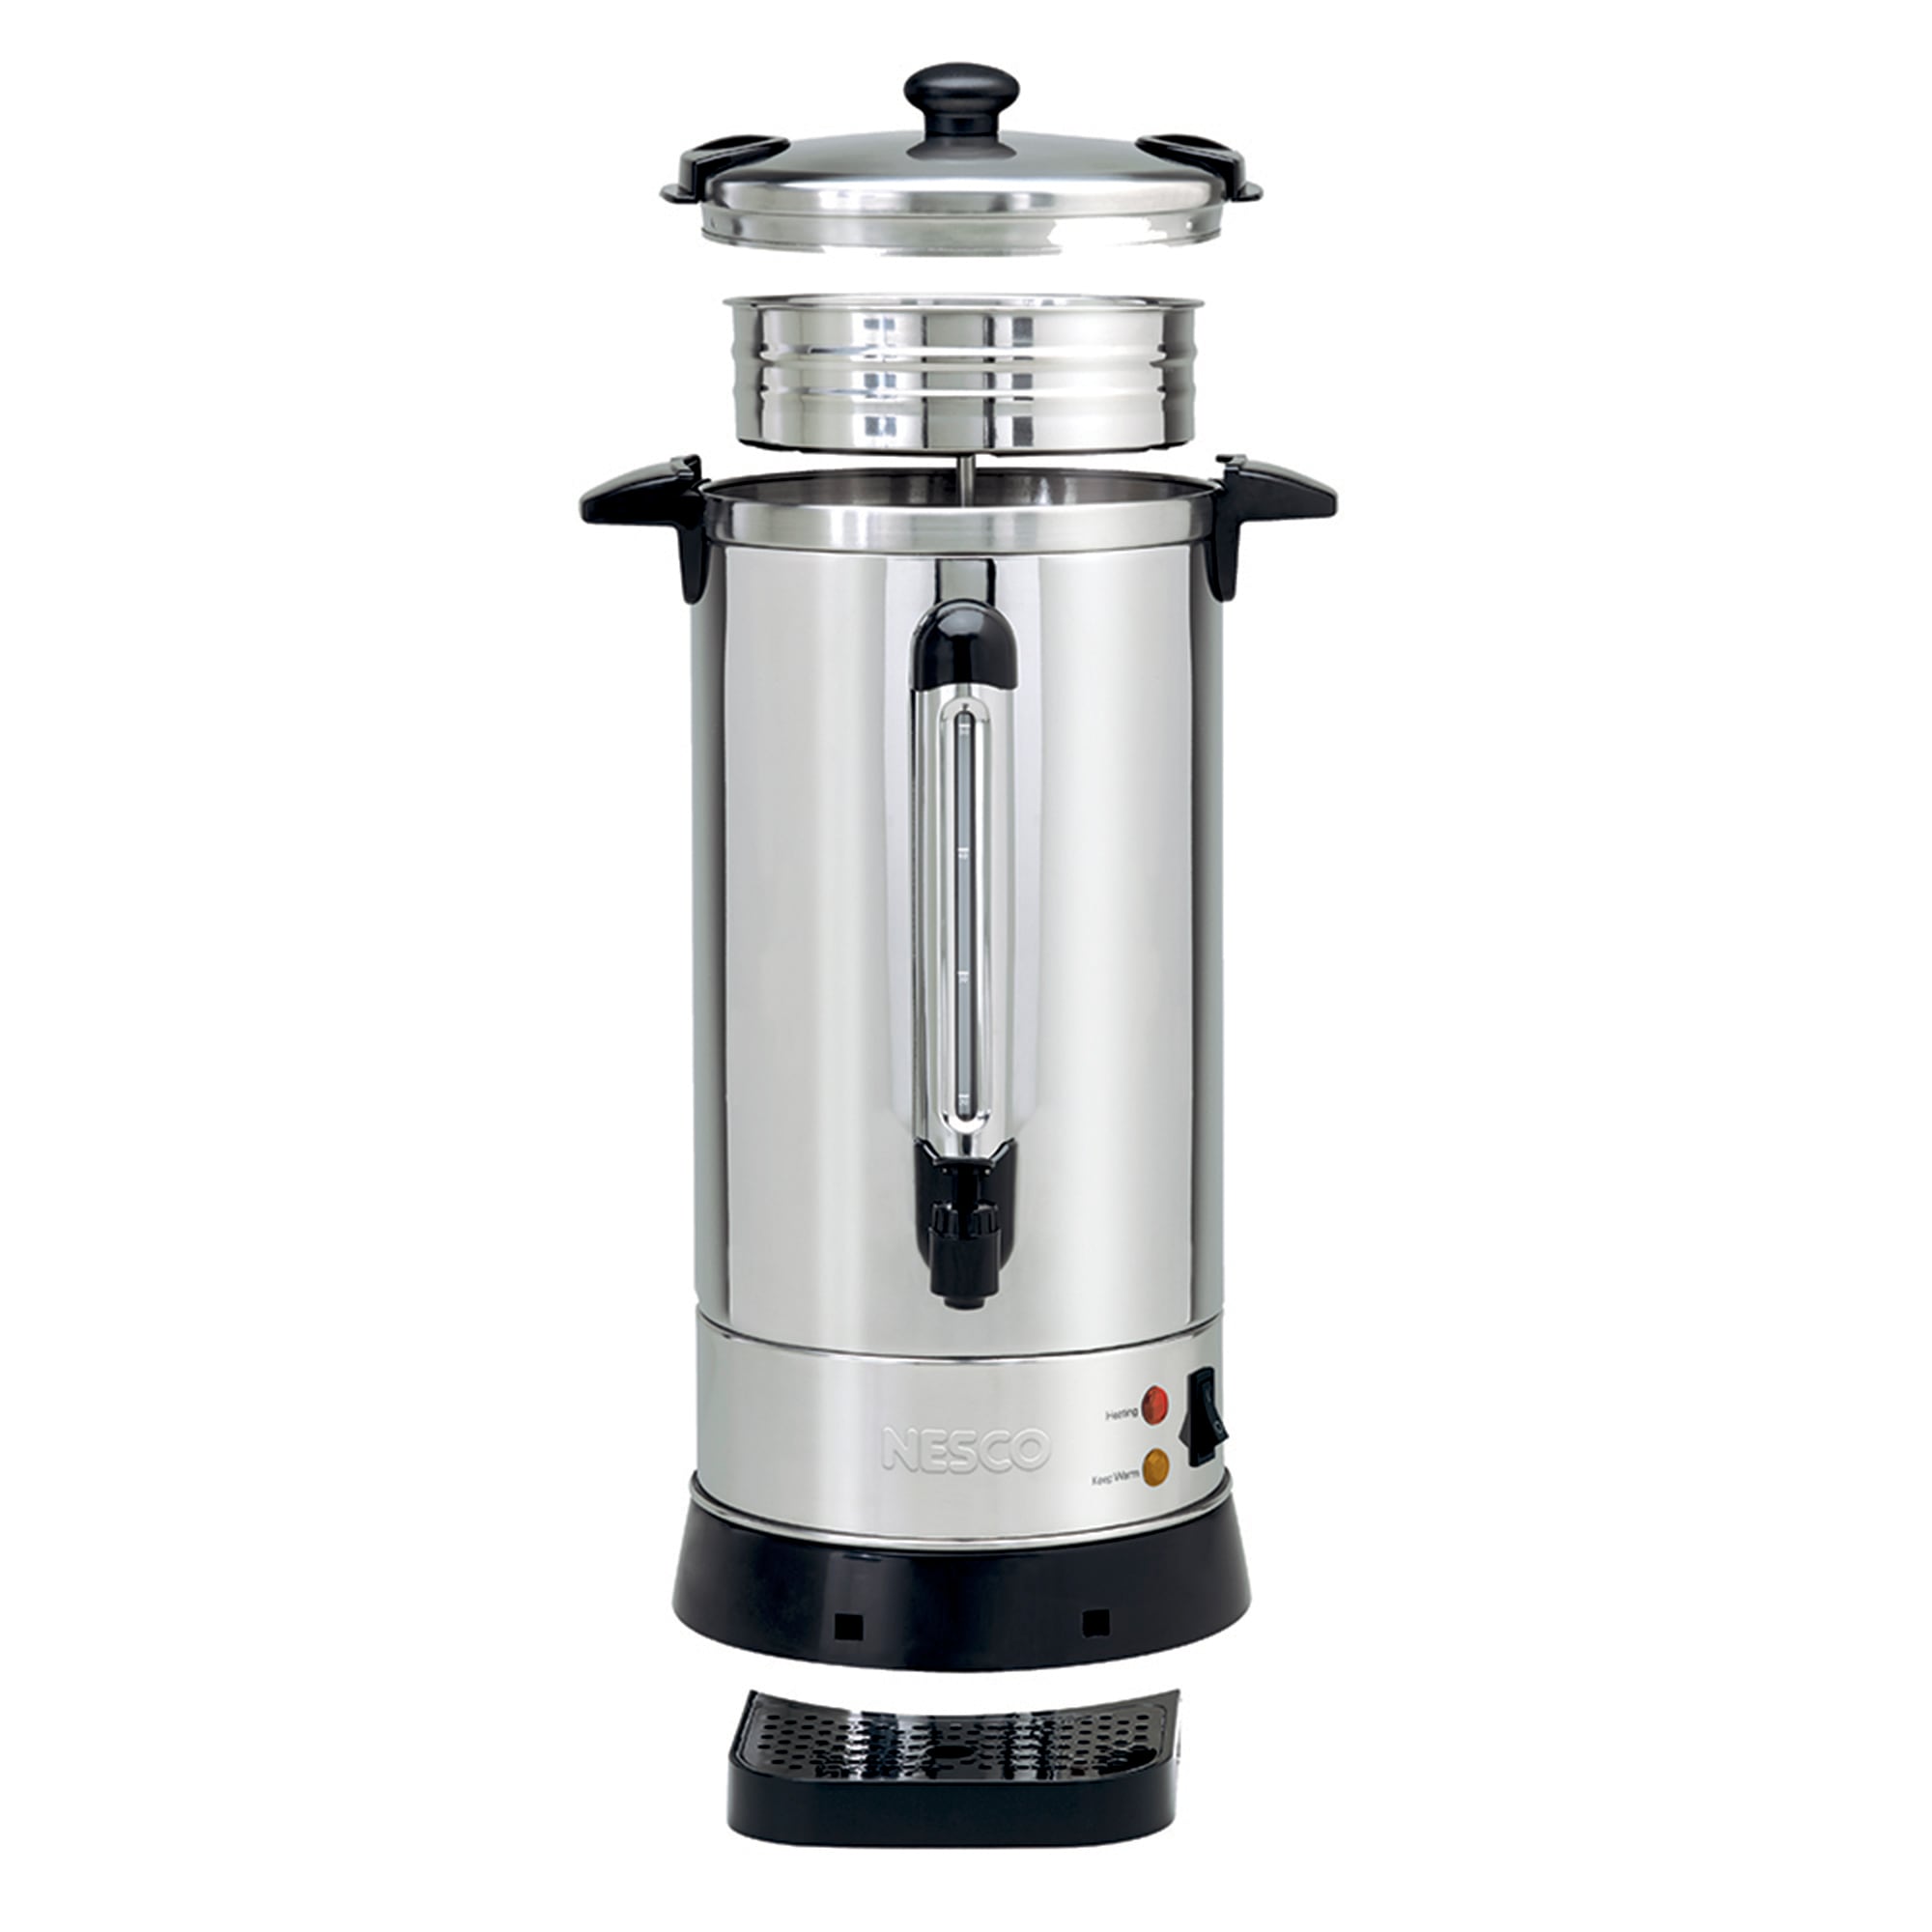 C.A.C. BVCM-30, 4.5 Liters Stainless Steel Deluxe Urn Coffee Maker, 30 Cups